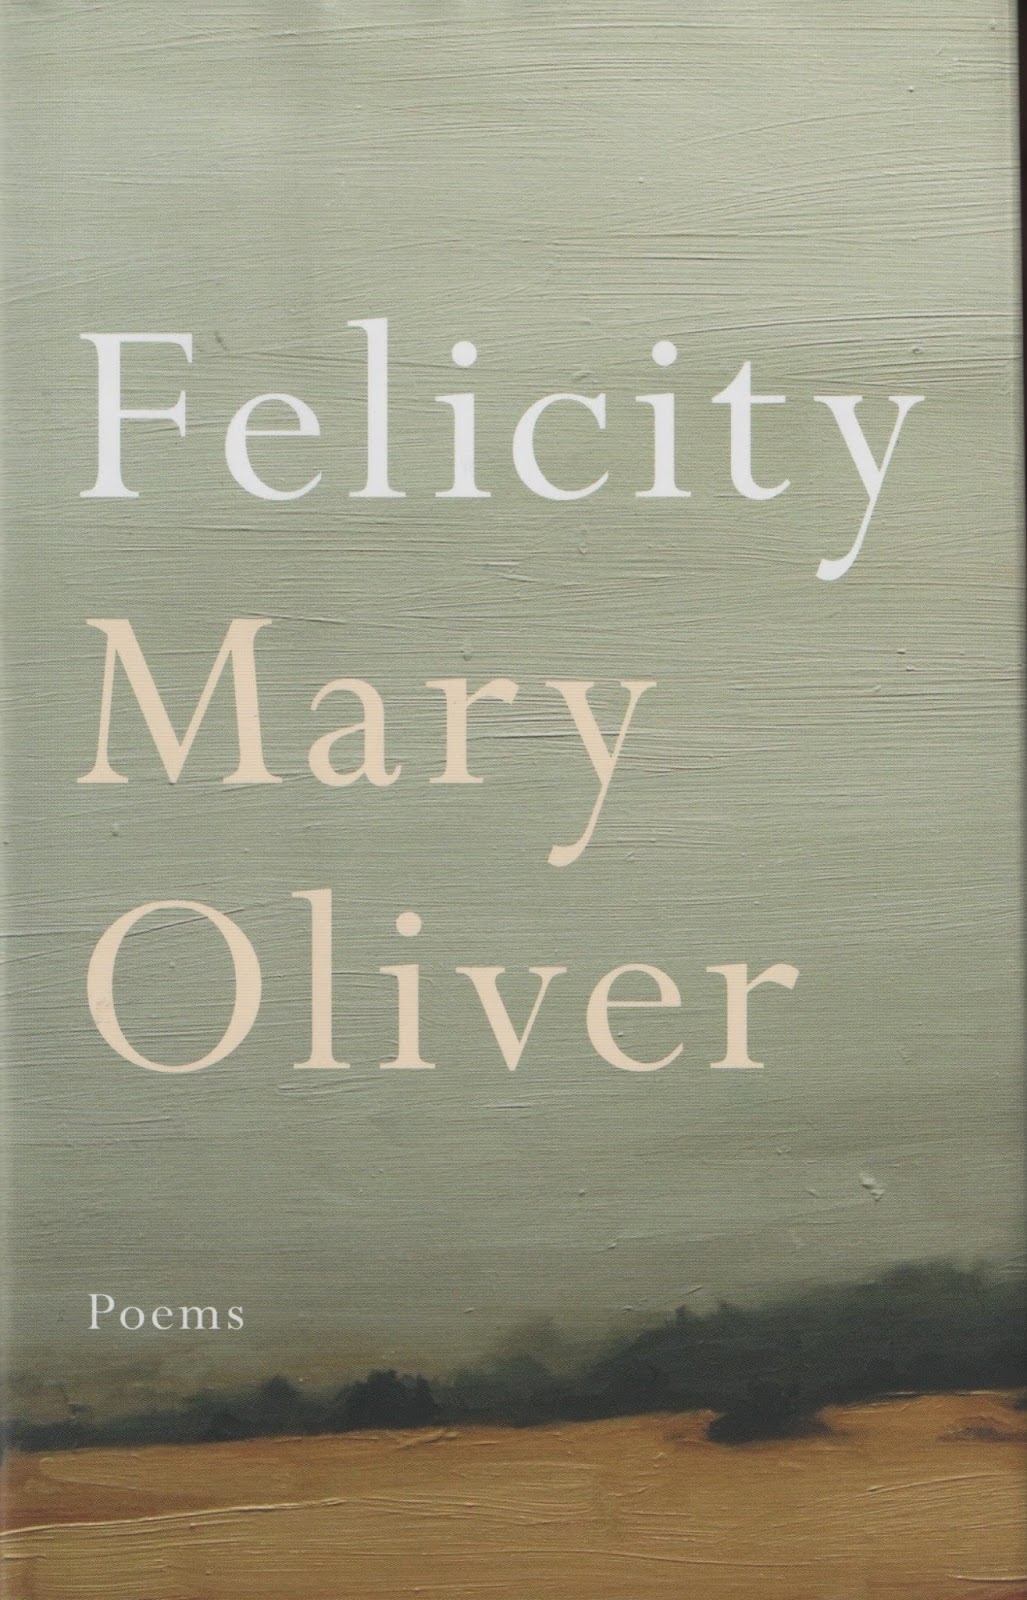 Review: Nature, Peace and Death in Mary Oliver's “Felicity”